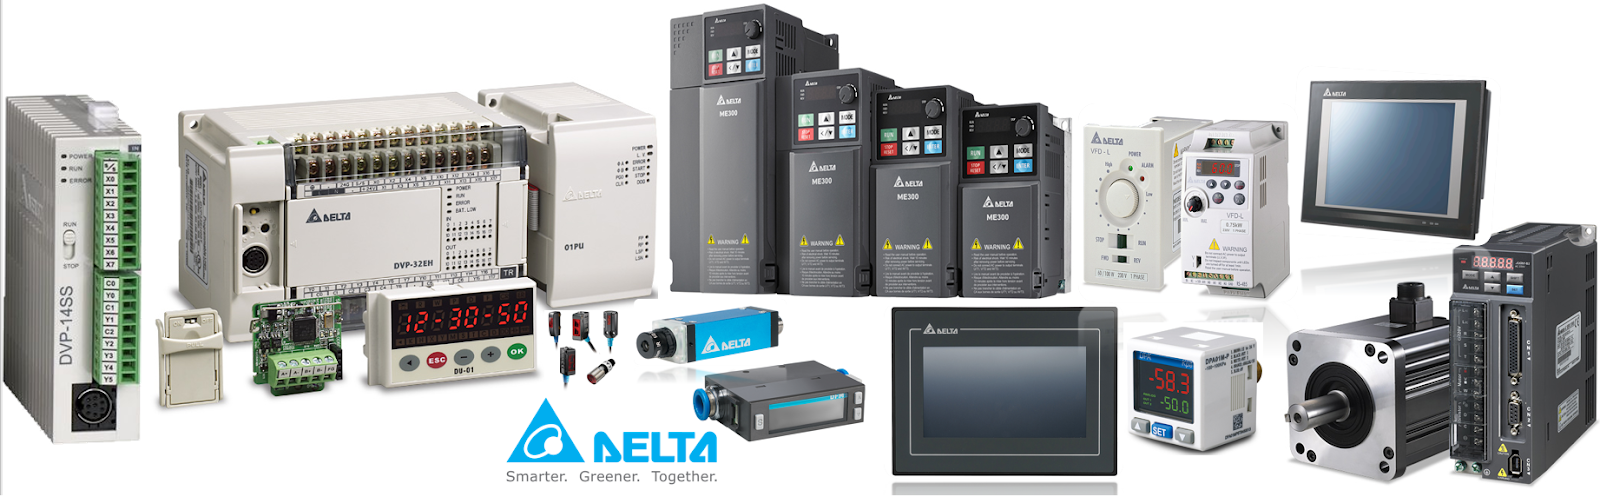 Delta Automation Solutions with Best Price and Services